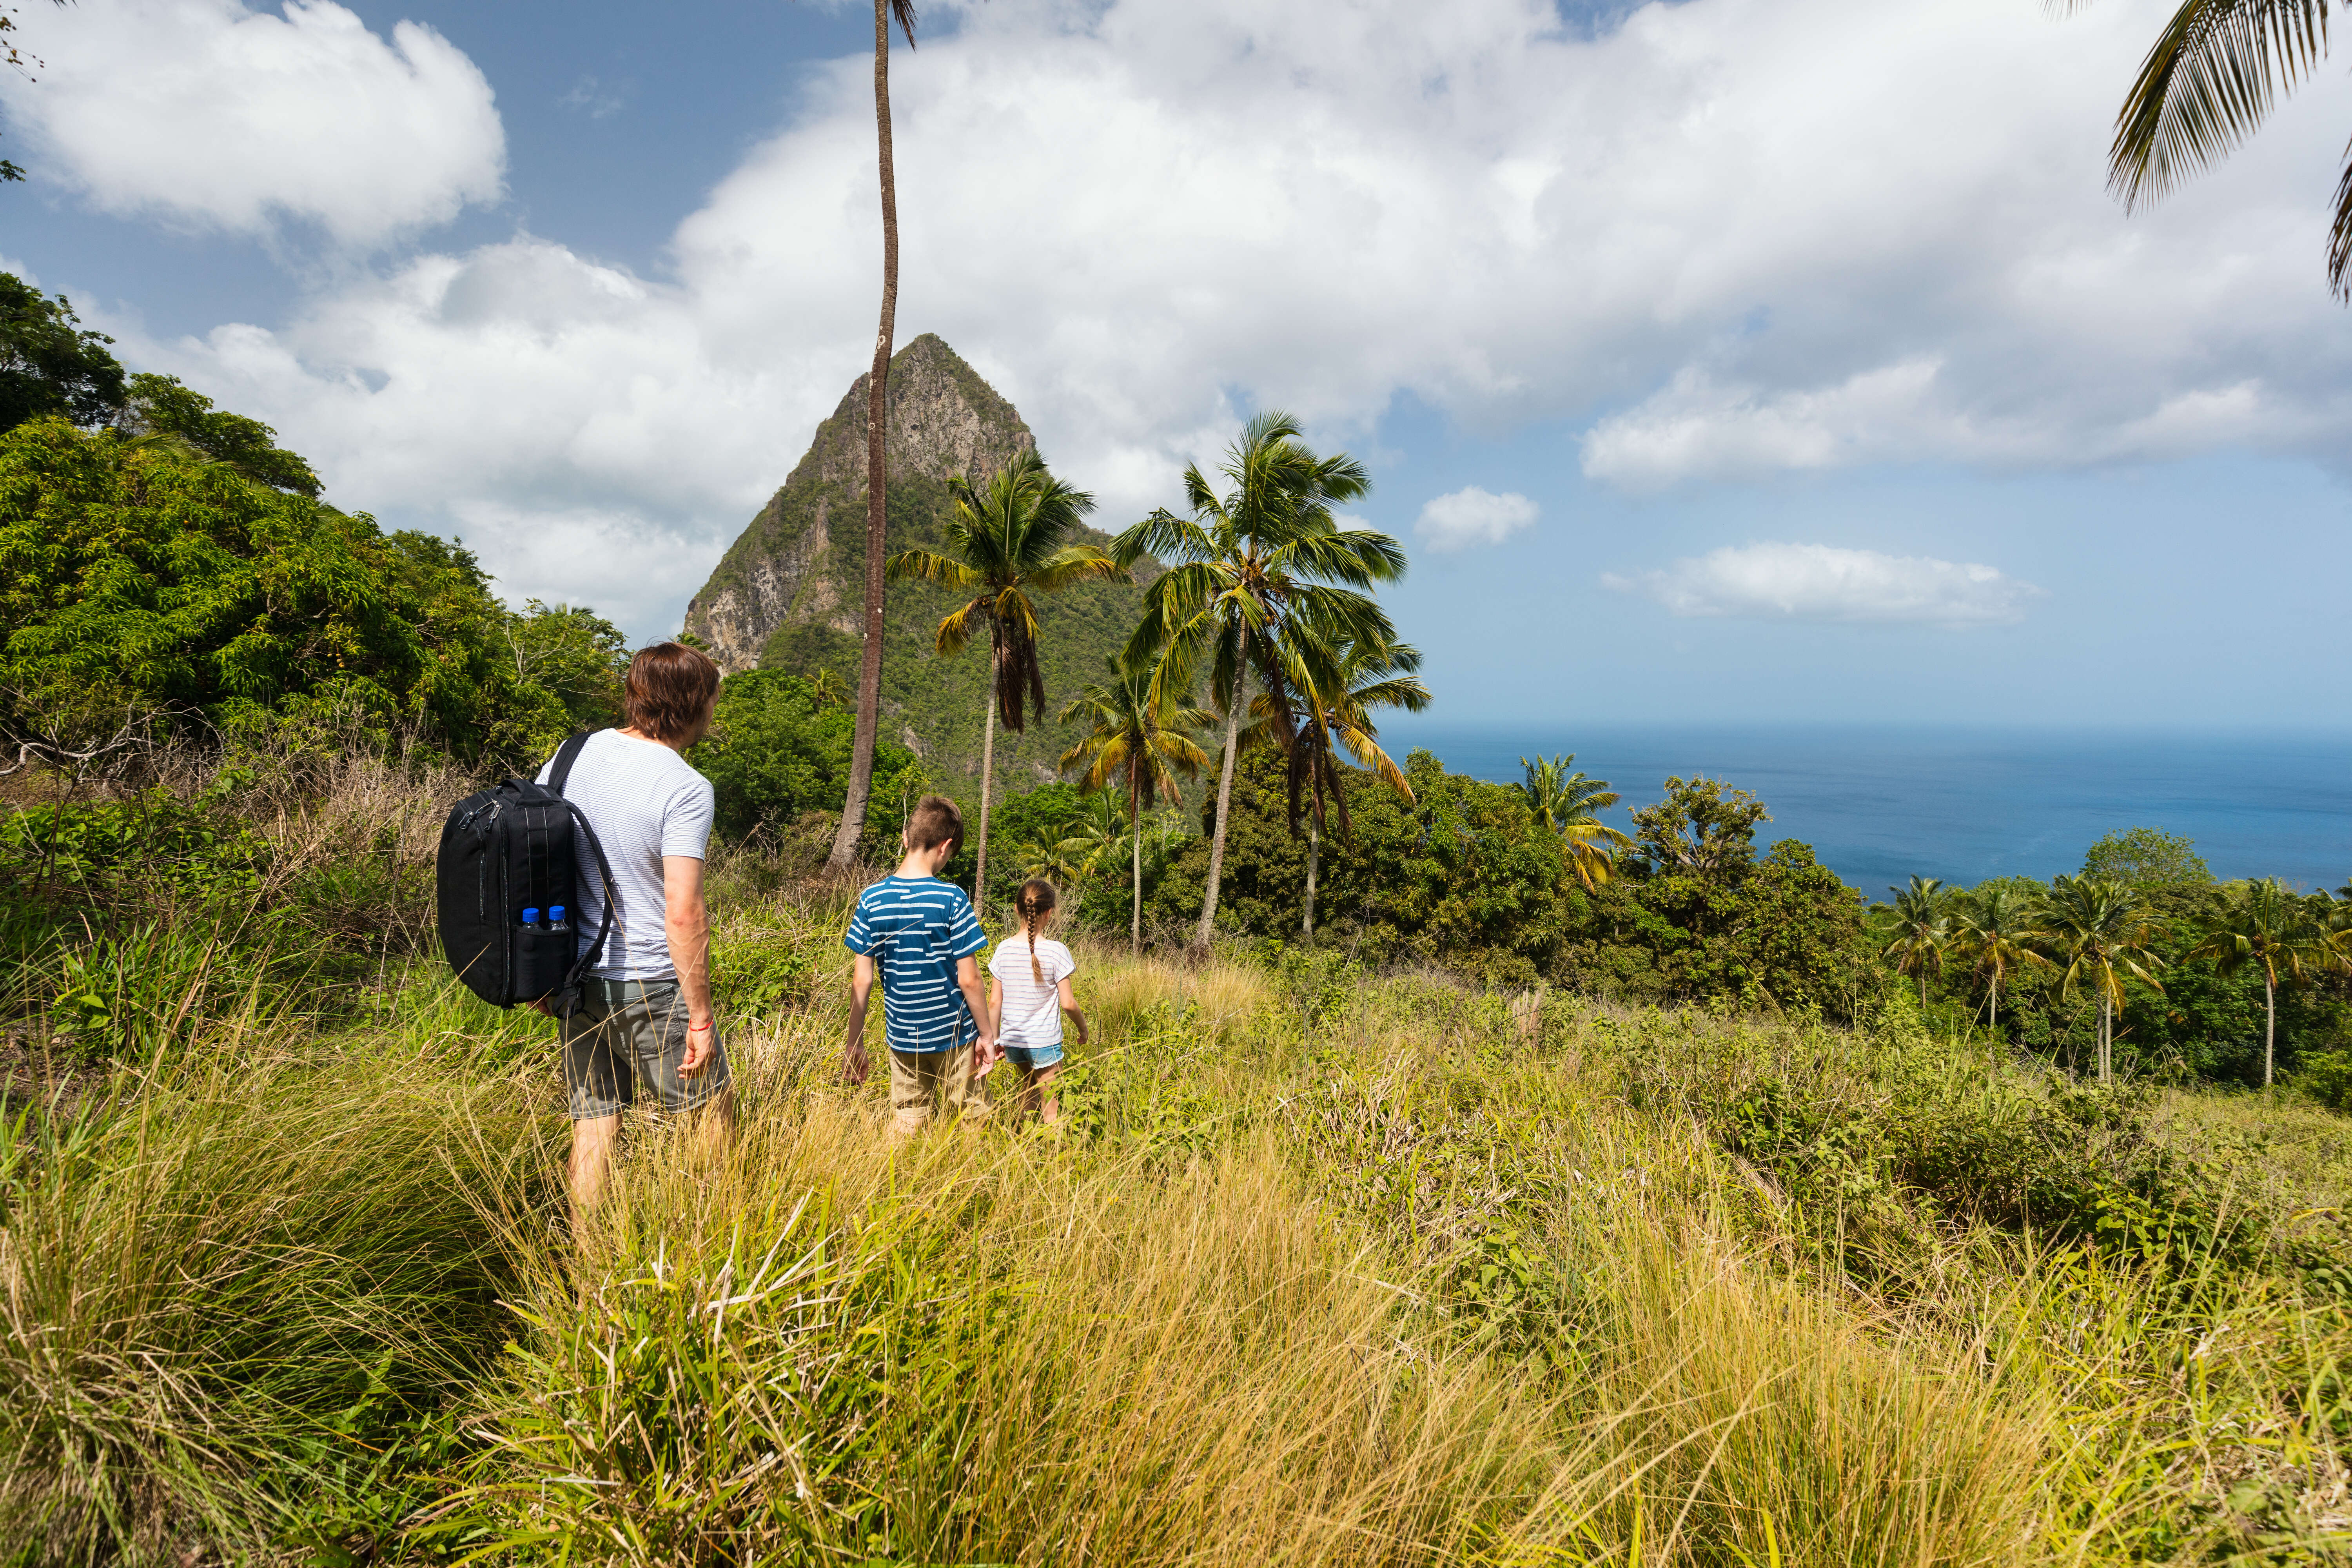 Family hiking in St Lucia with the Pitons in view